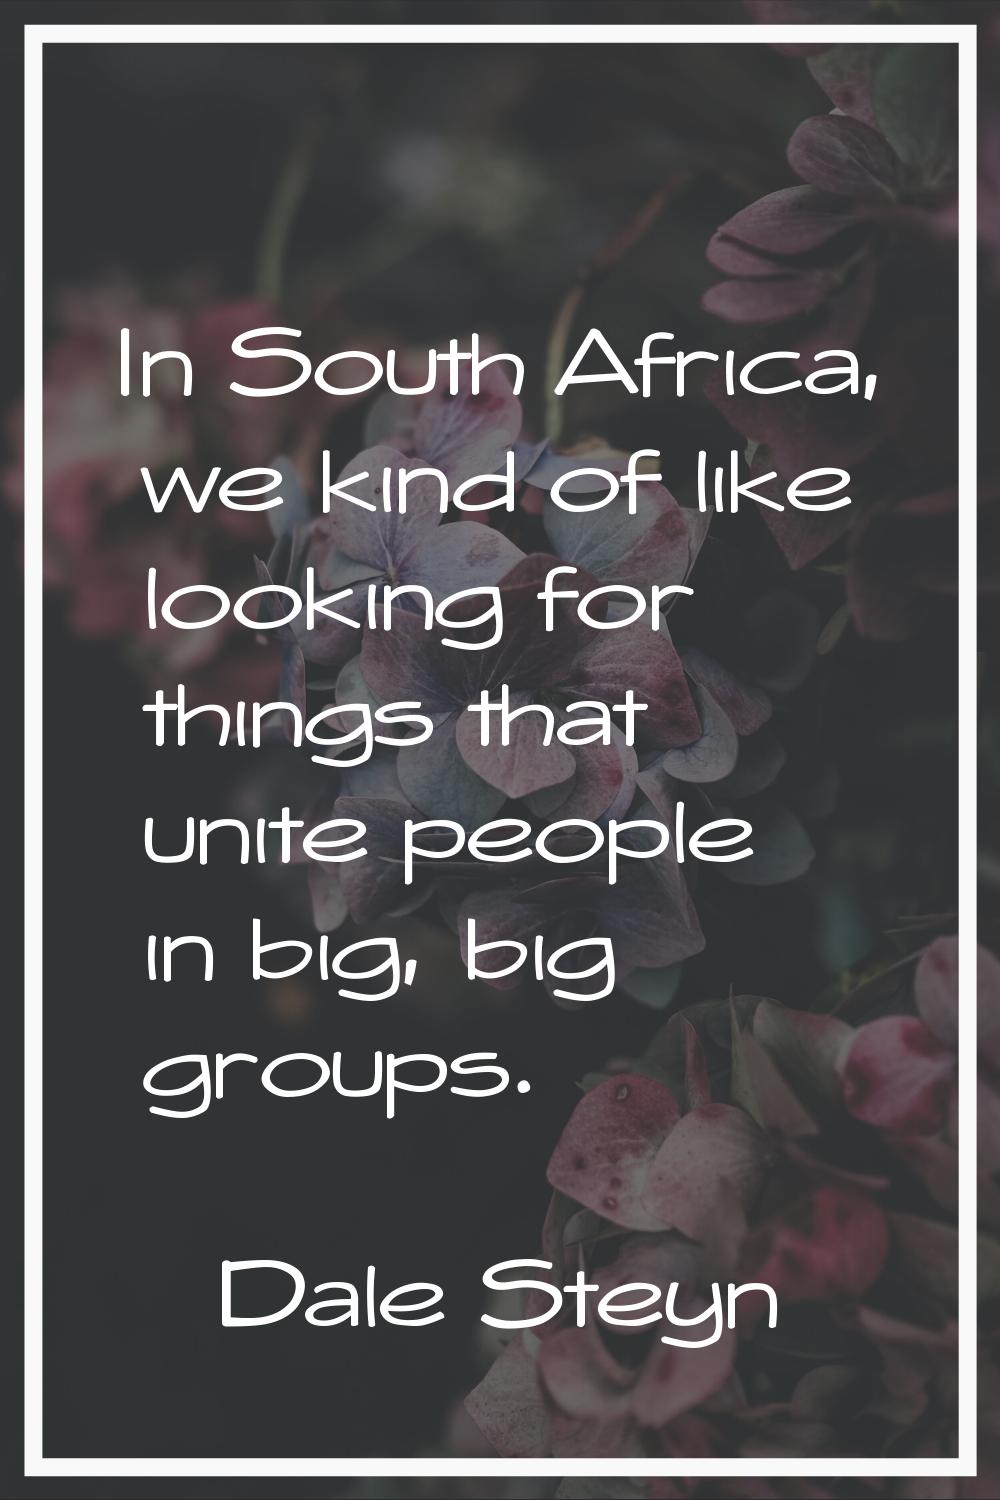 In South Africa, we kind of like looking for things that unite people in big, big groups.